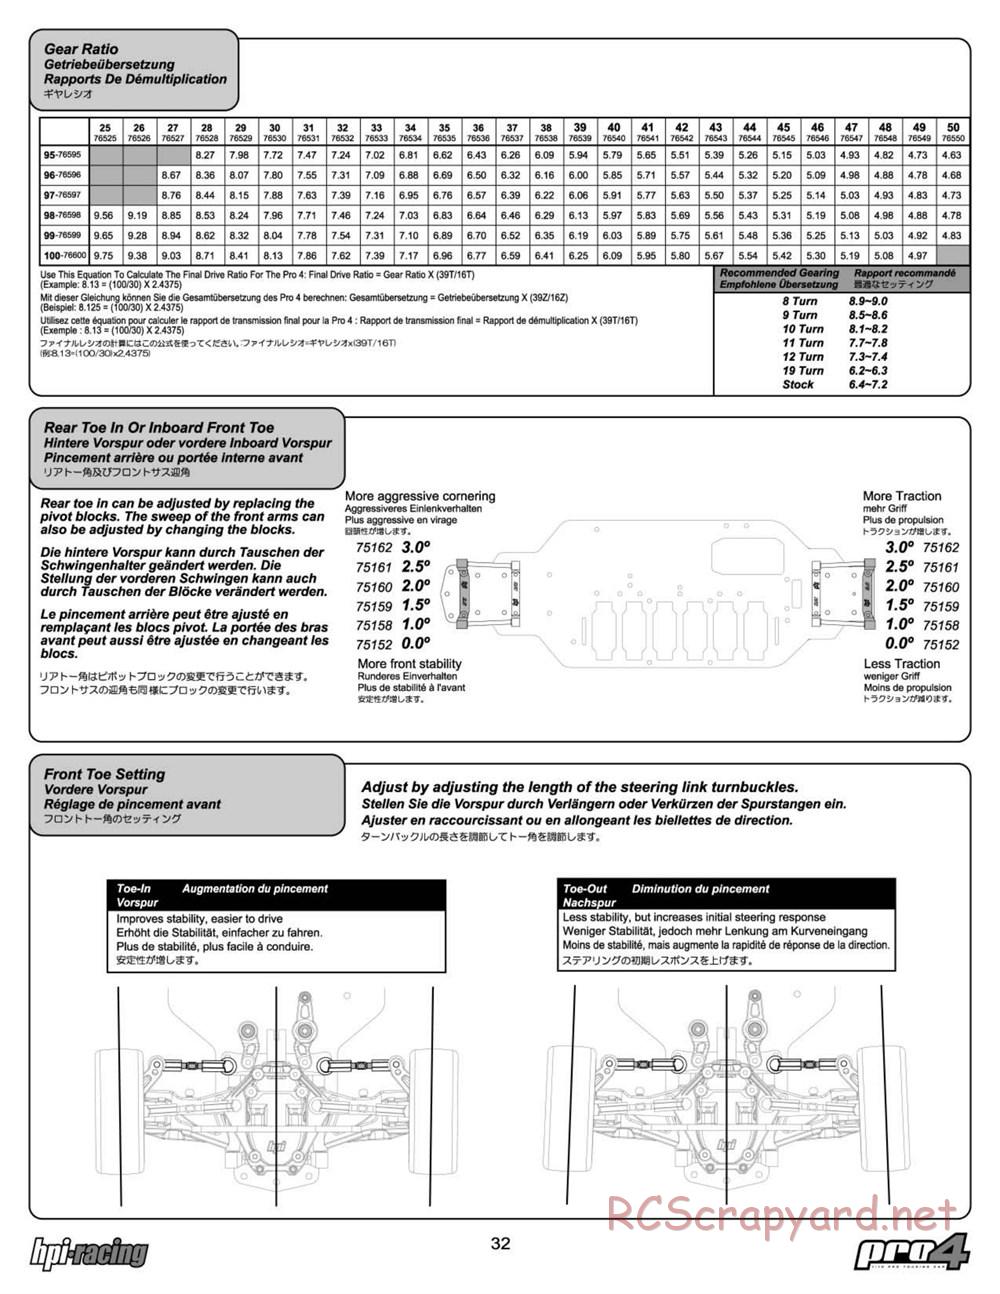 HPI - RS4 Pro4 - Manual - Page 32